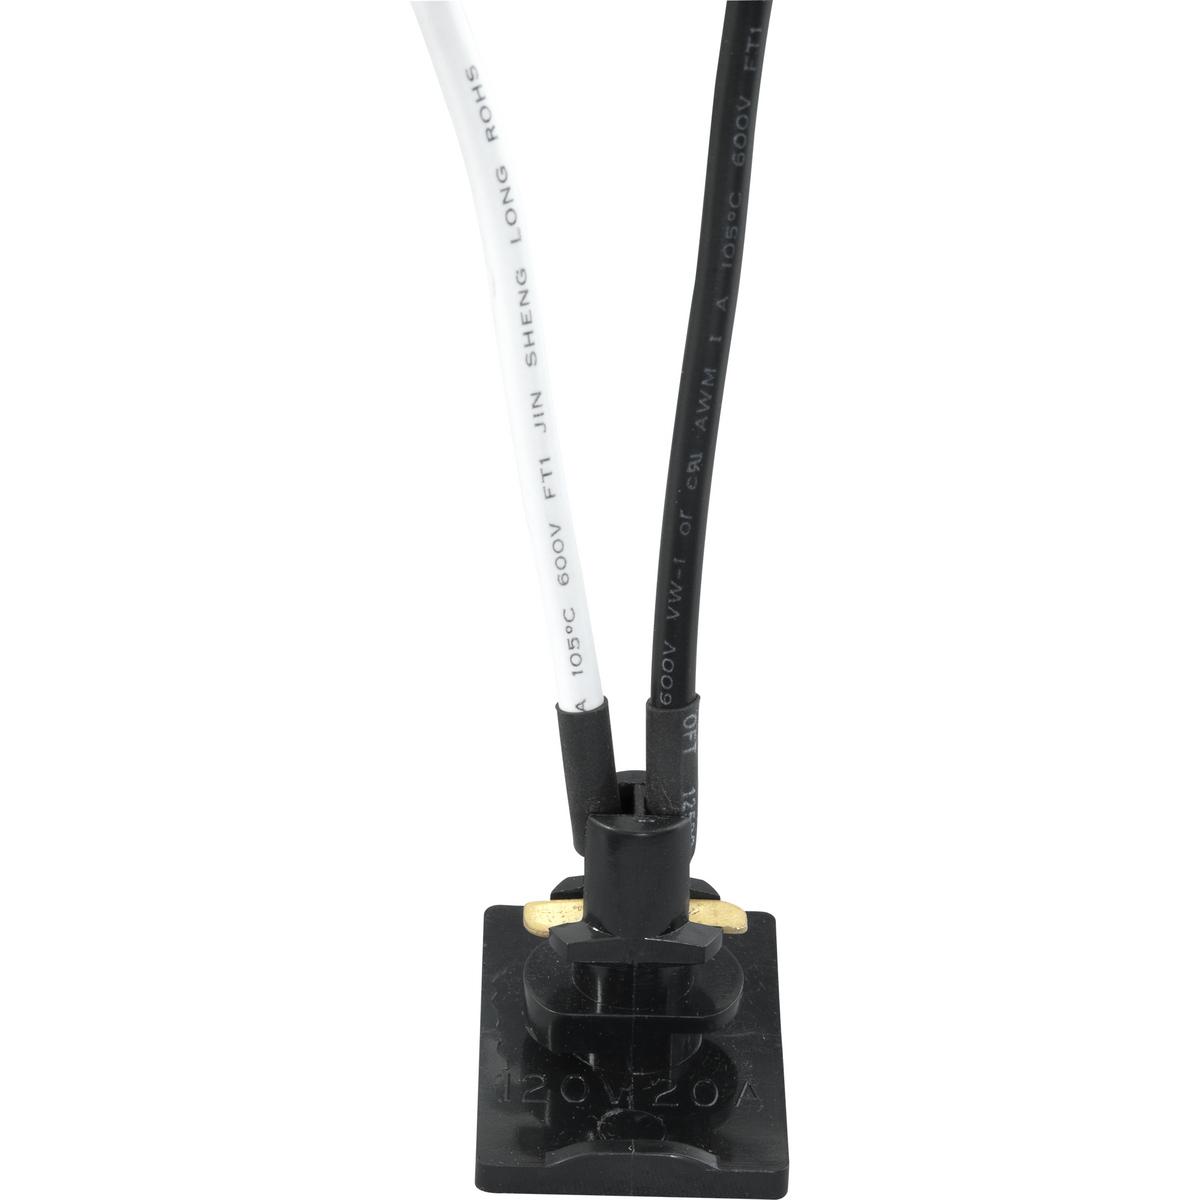 Hubbell P8730-31 Anywhere Power Feed snaps into place at any point along the track. Has 8" leads. Includes one P8717-10 dead end. Black finish.  ; Black finish. ; Has 8" leads. ; Includes one P8717-10 dead end.